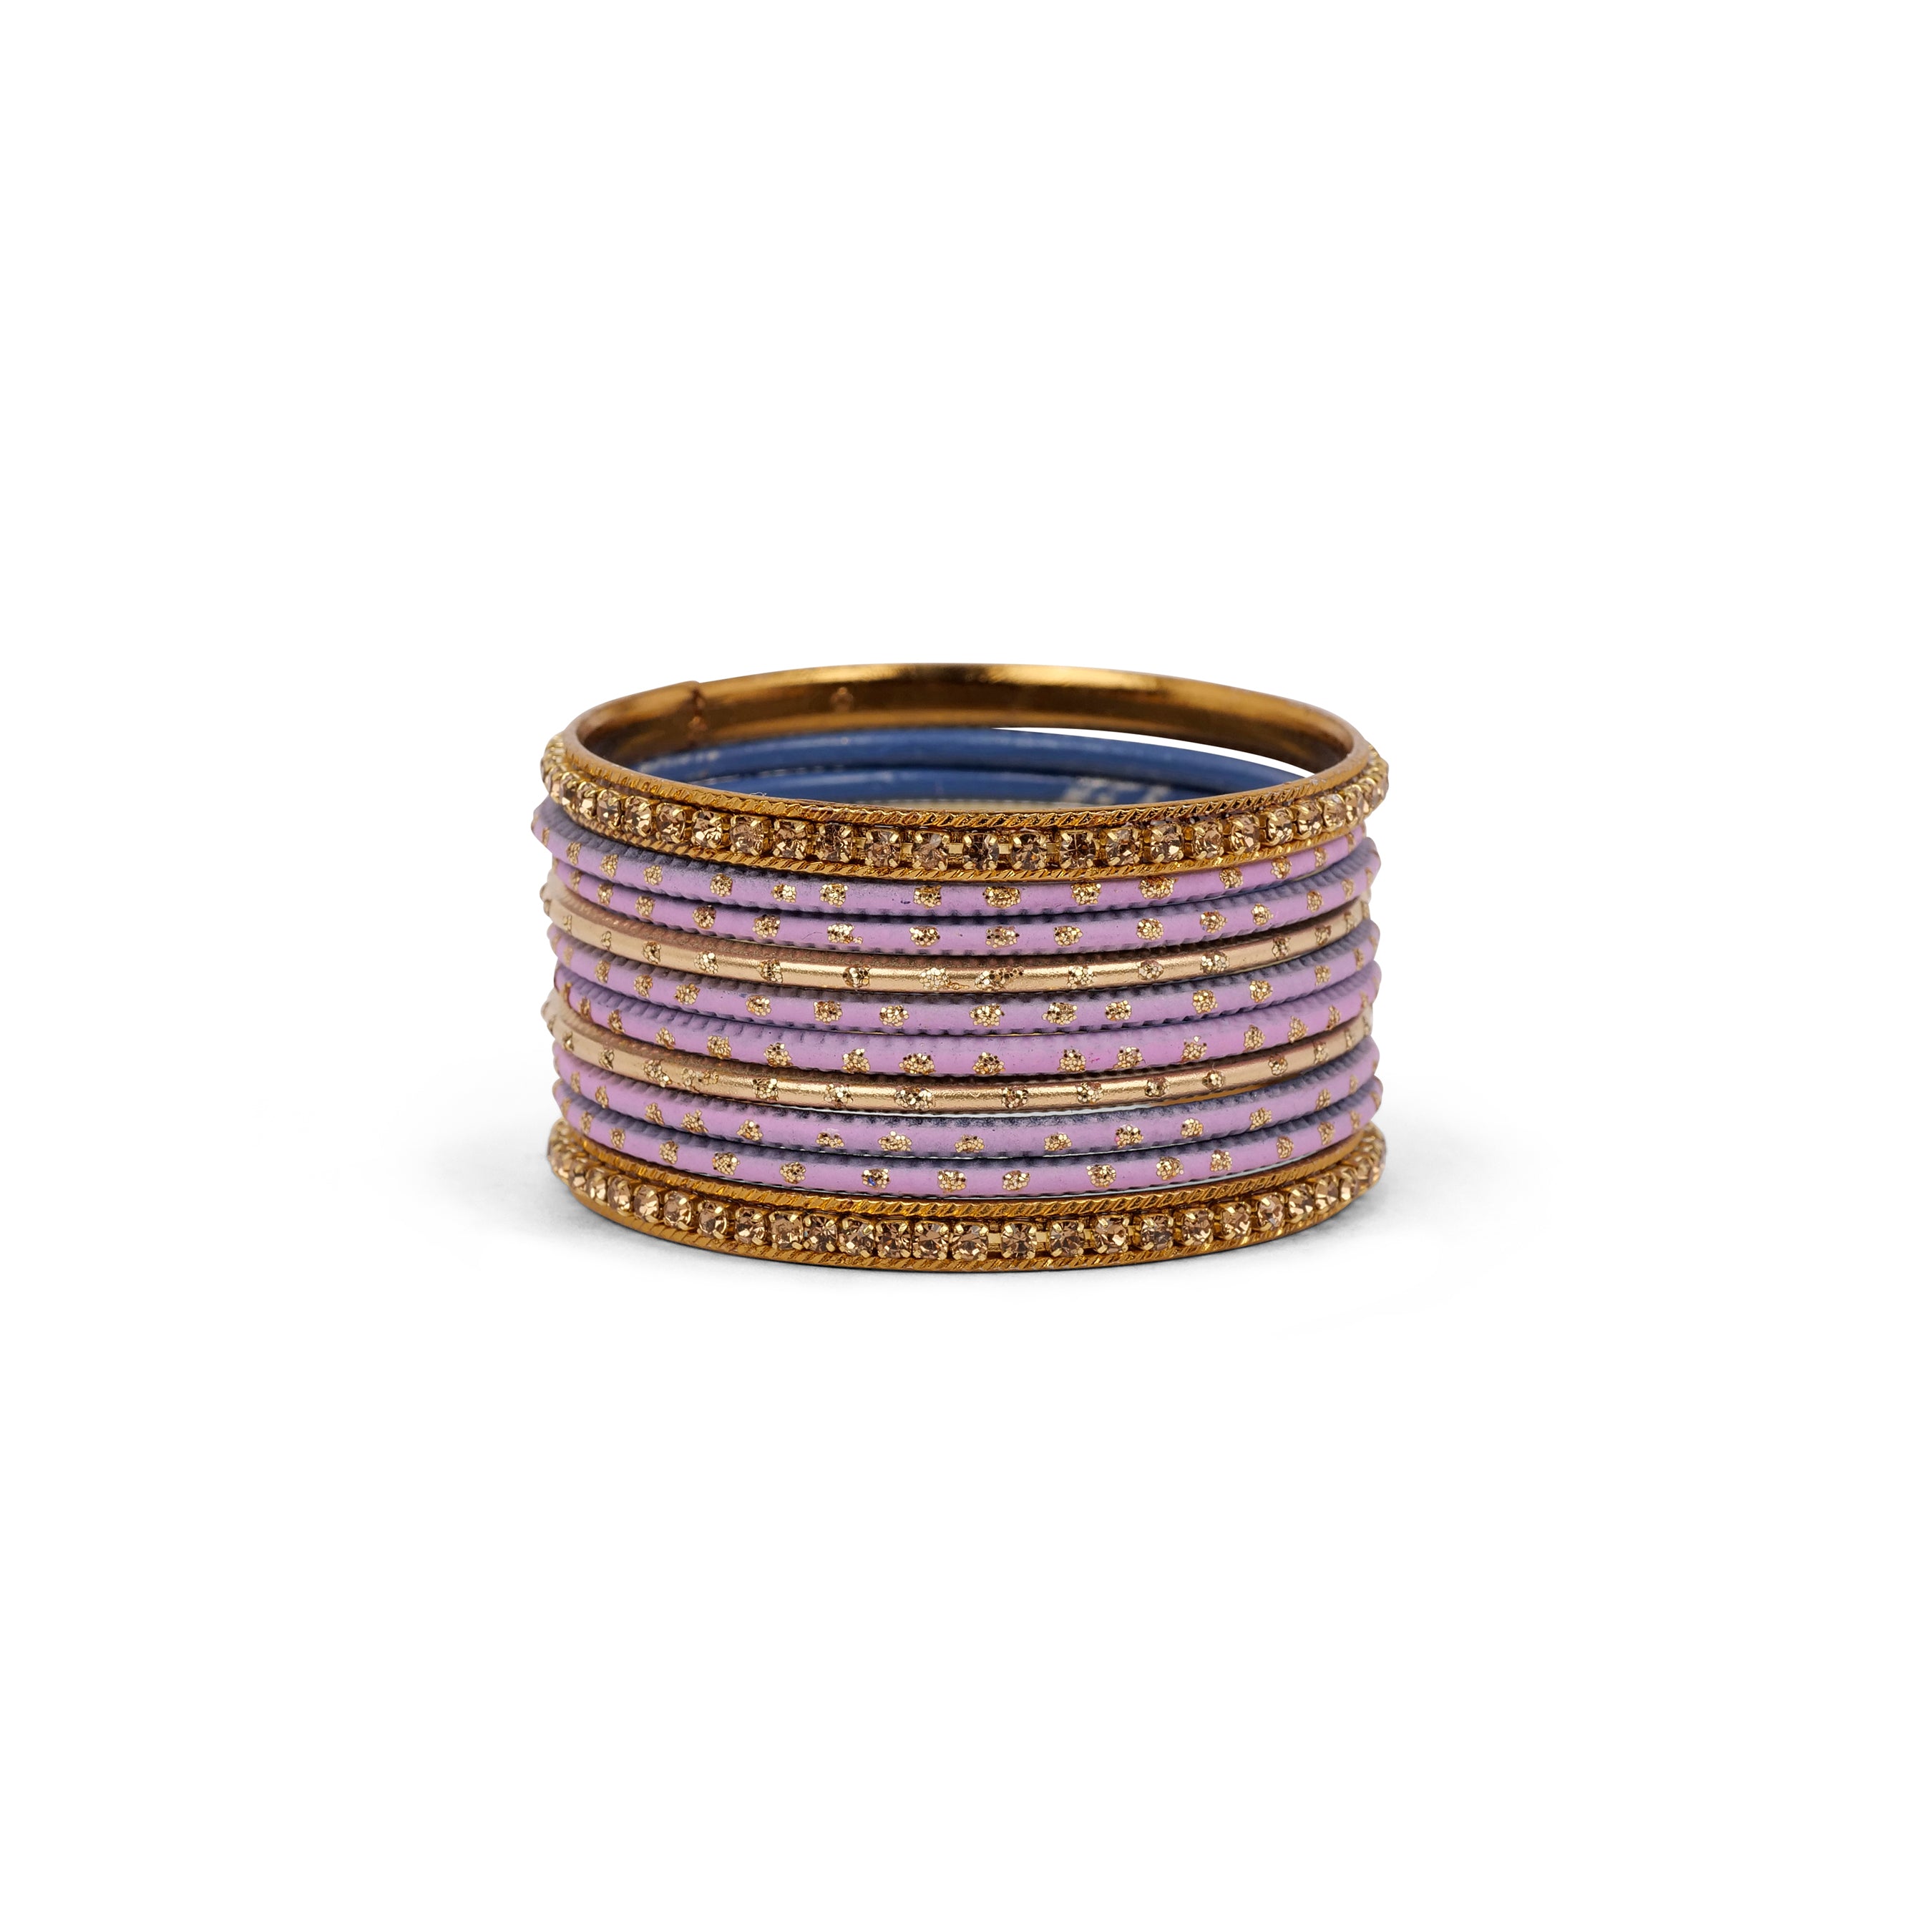 Children's Bangle Set in Purple and Antique Gold